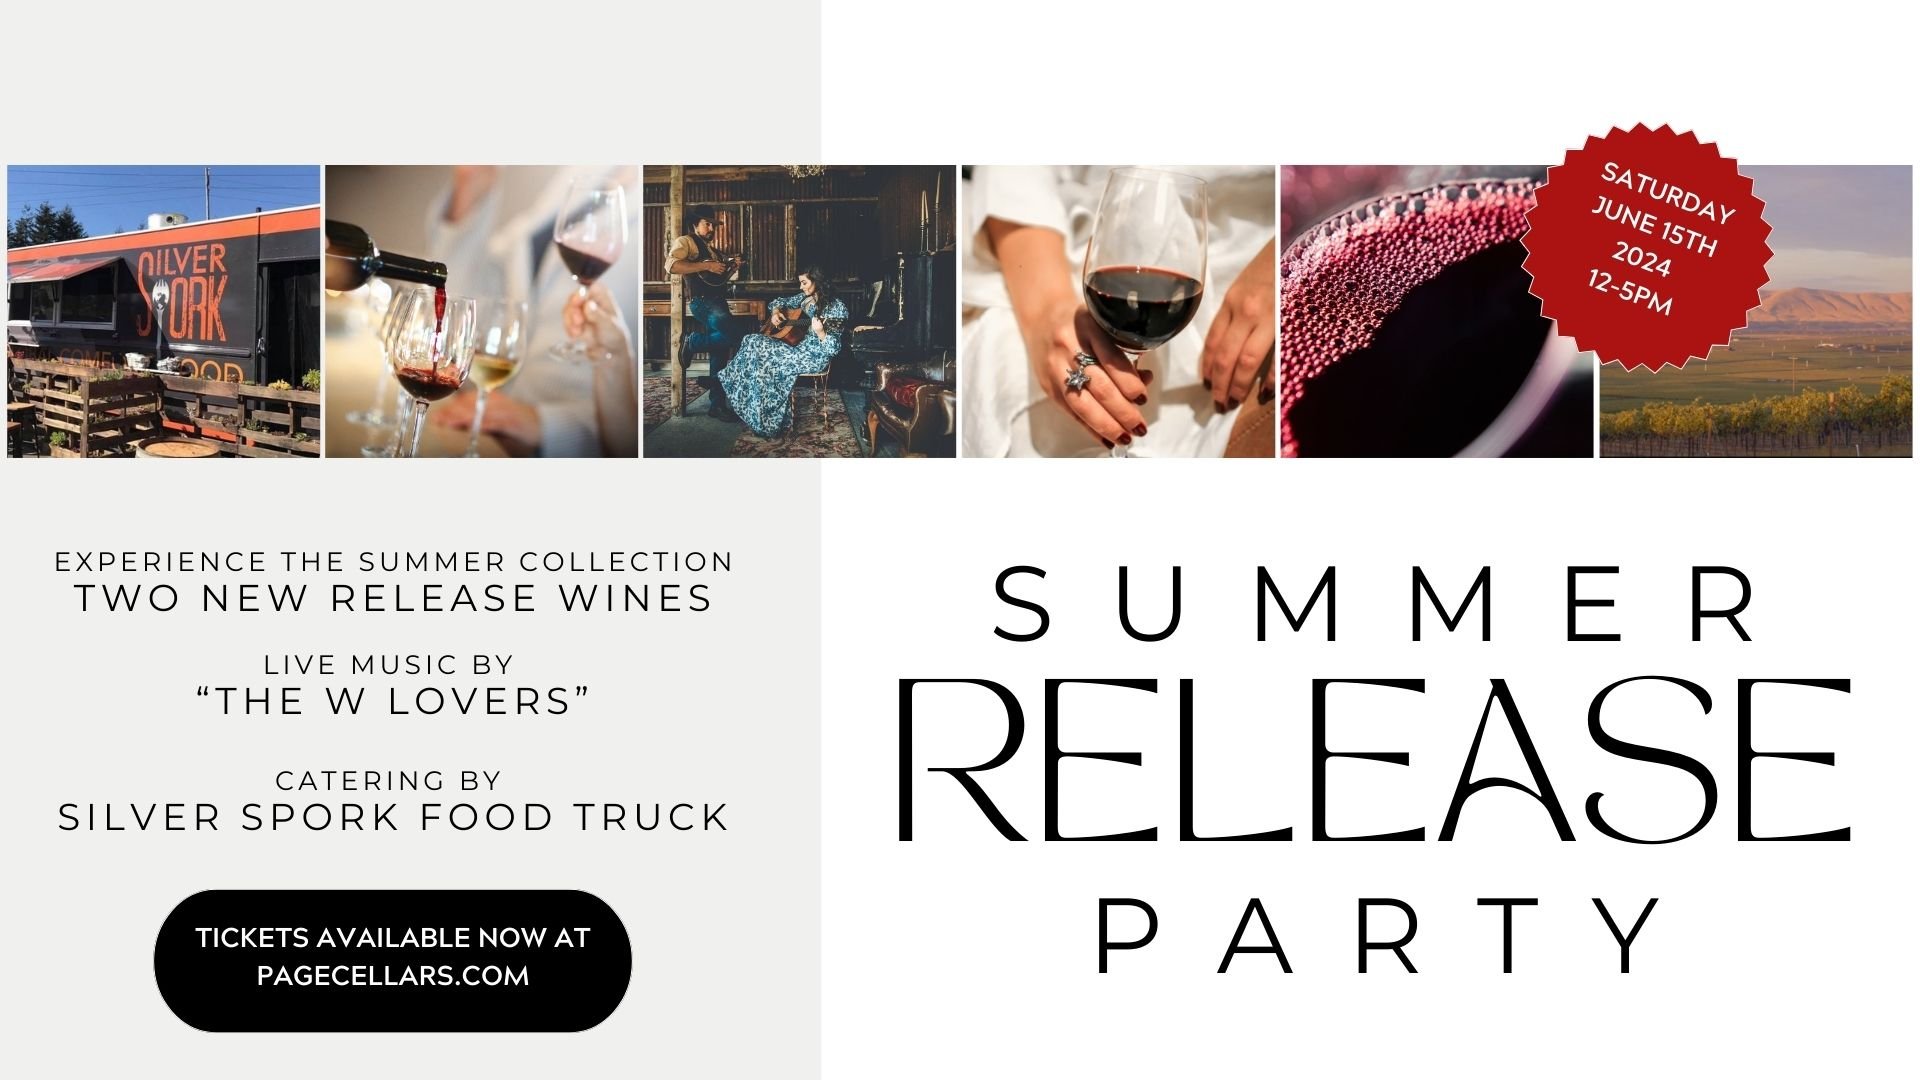 The release of our Summer 2024 Collection is right around the corner! We hope you'll be able to join us Saturday June 15th 12-5pm! It's going to be a fun-filled day of wine, food, music, and celebration of our wine club! 

Considering a membership? W